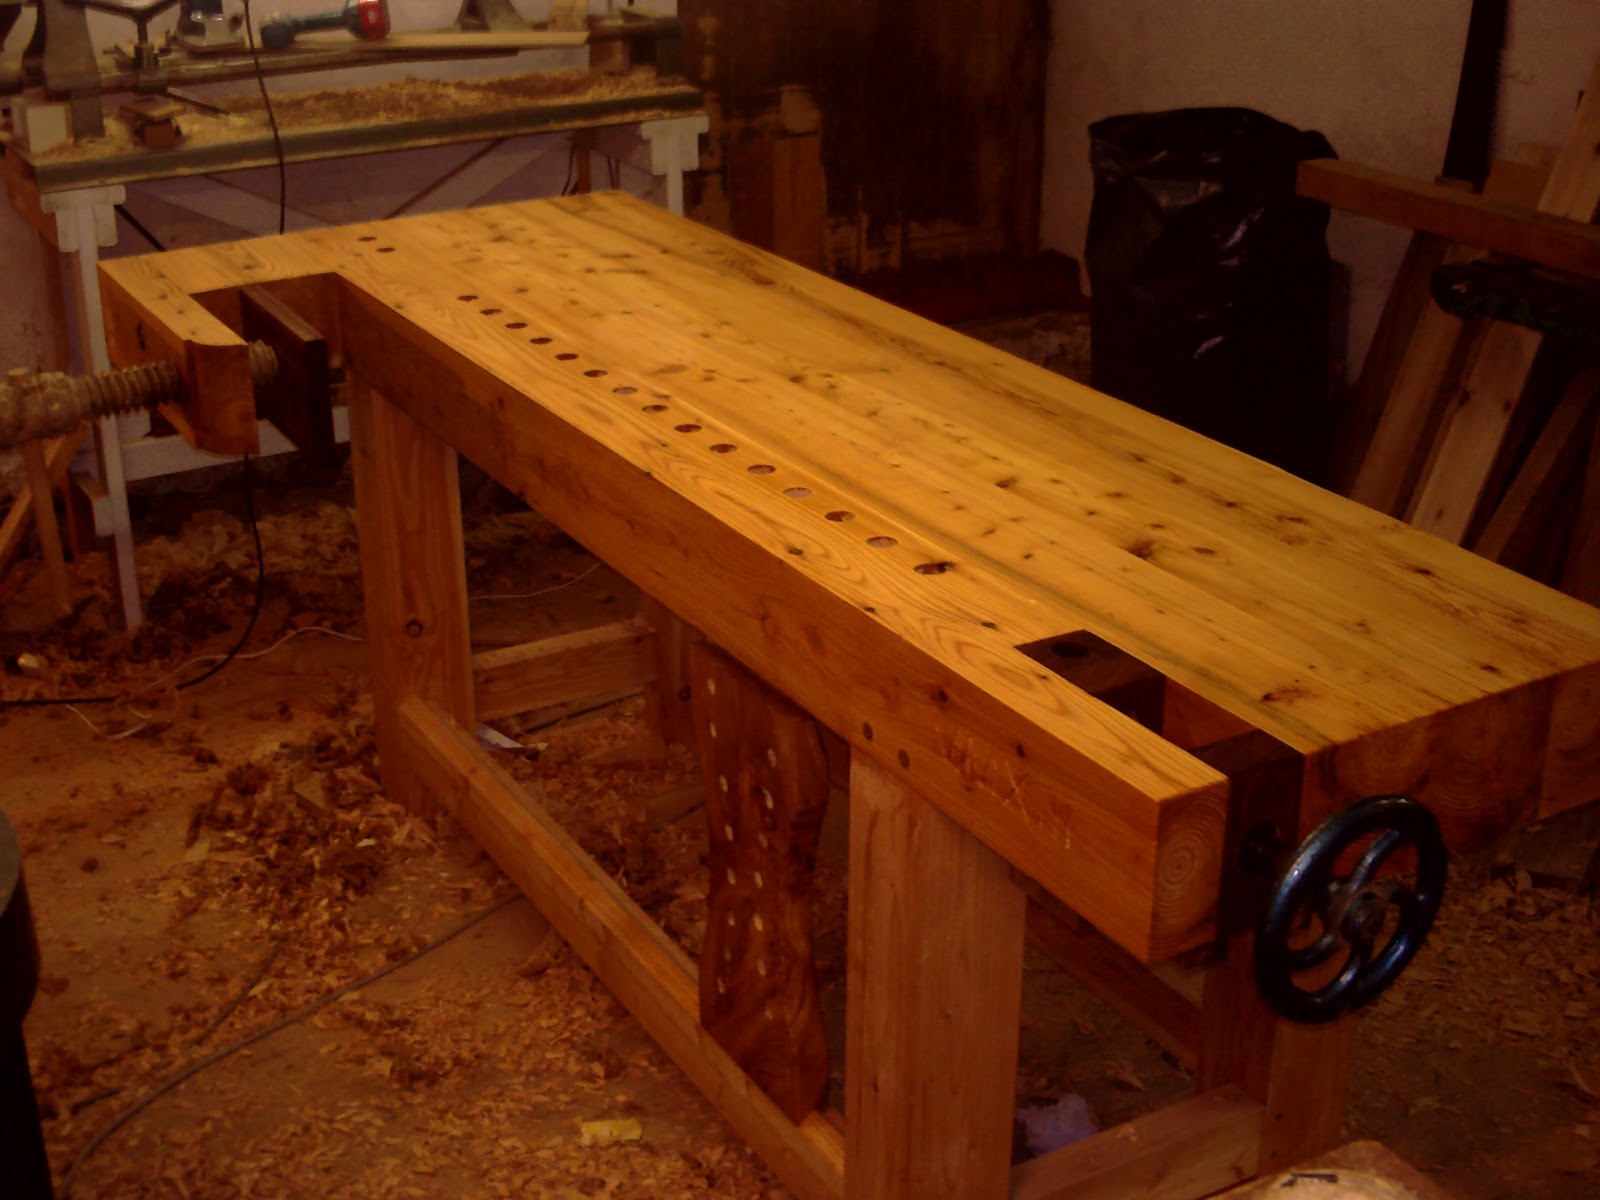 Toolerable: The finished workbench